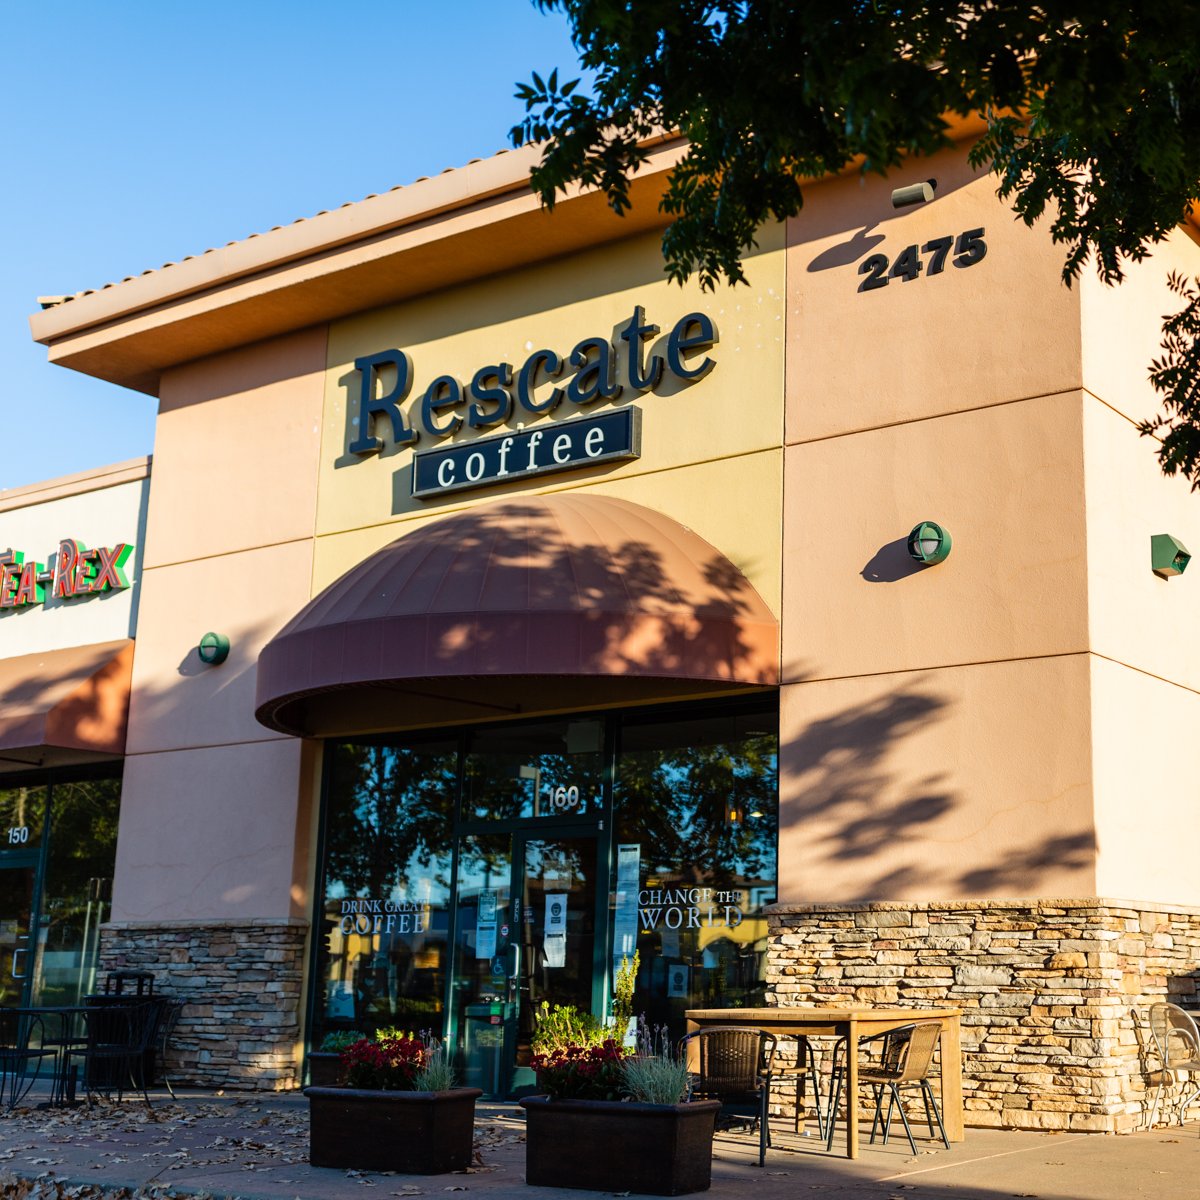 We love our community. Getting the chance to serve them fresh, quality coffee each day is just a bonus! #RescateCoffee #Rescate #Coffee #ElkGrove #ElkGroveCA